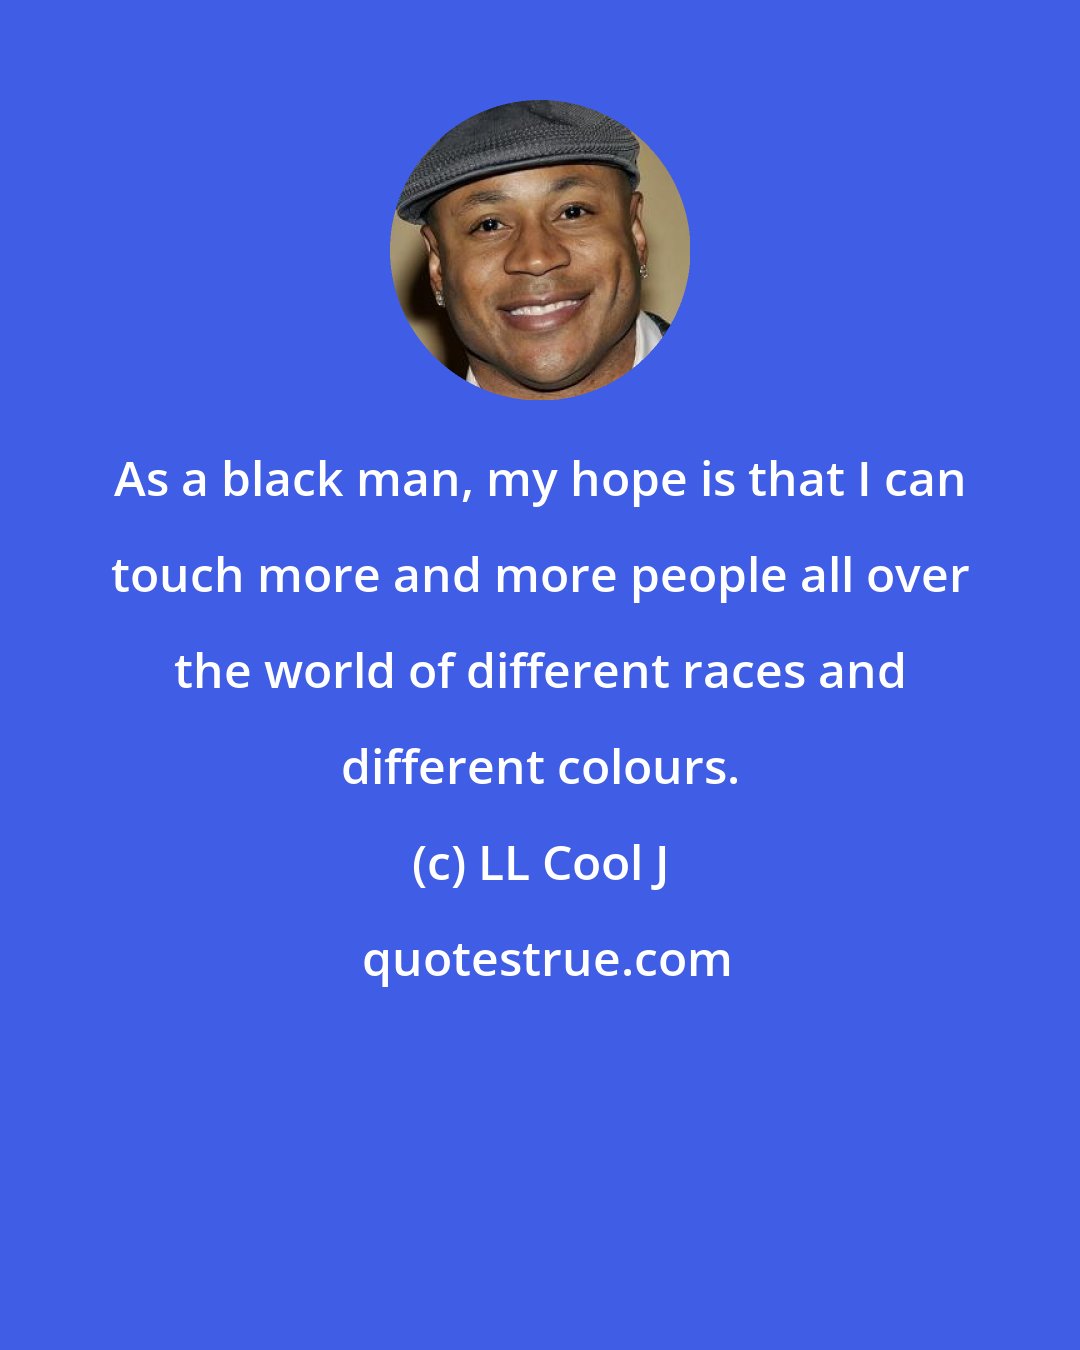 LL Cool J: As a black man, my hope is that I can touch more and more people all over the world of different races and different colours.